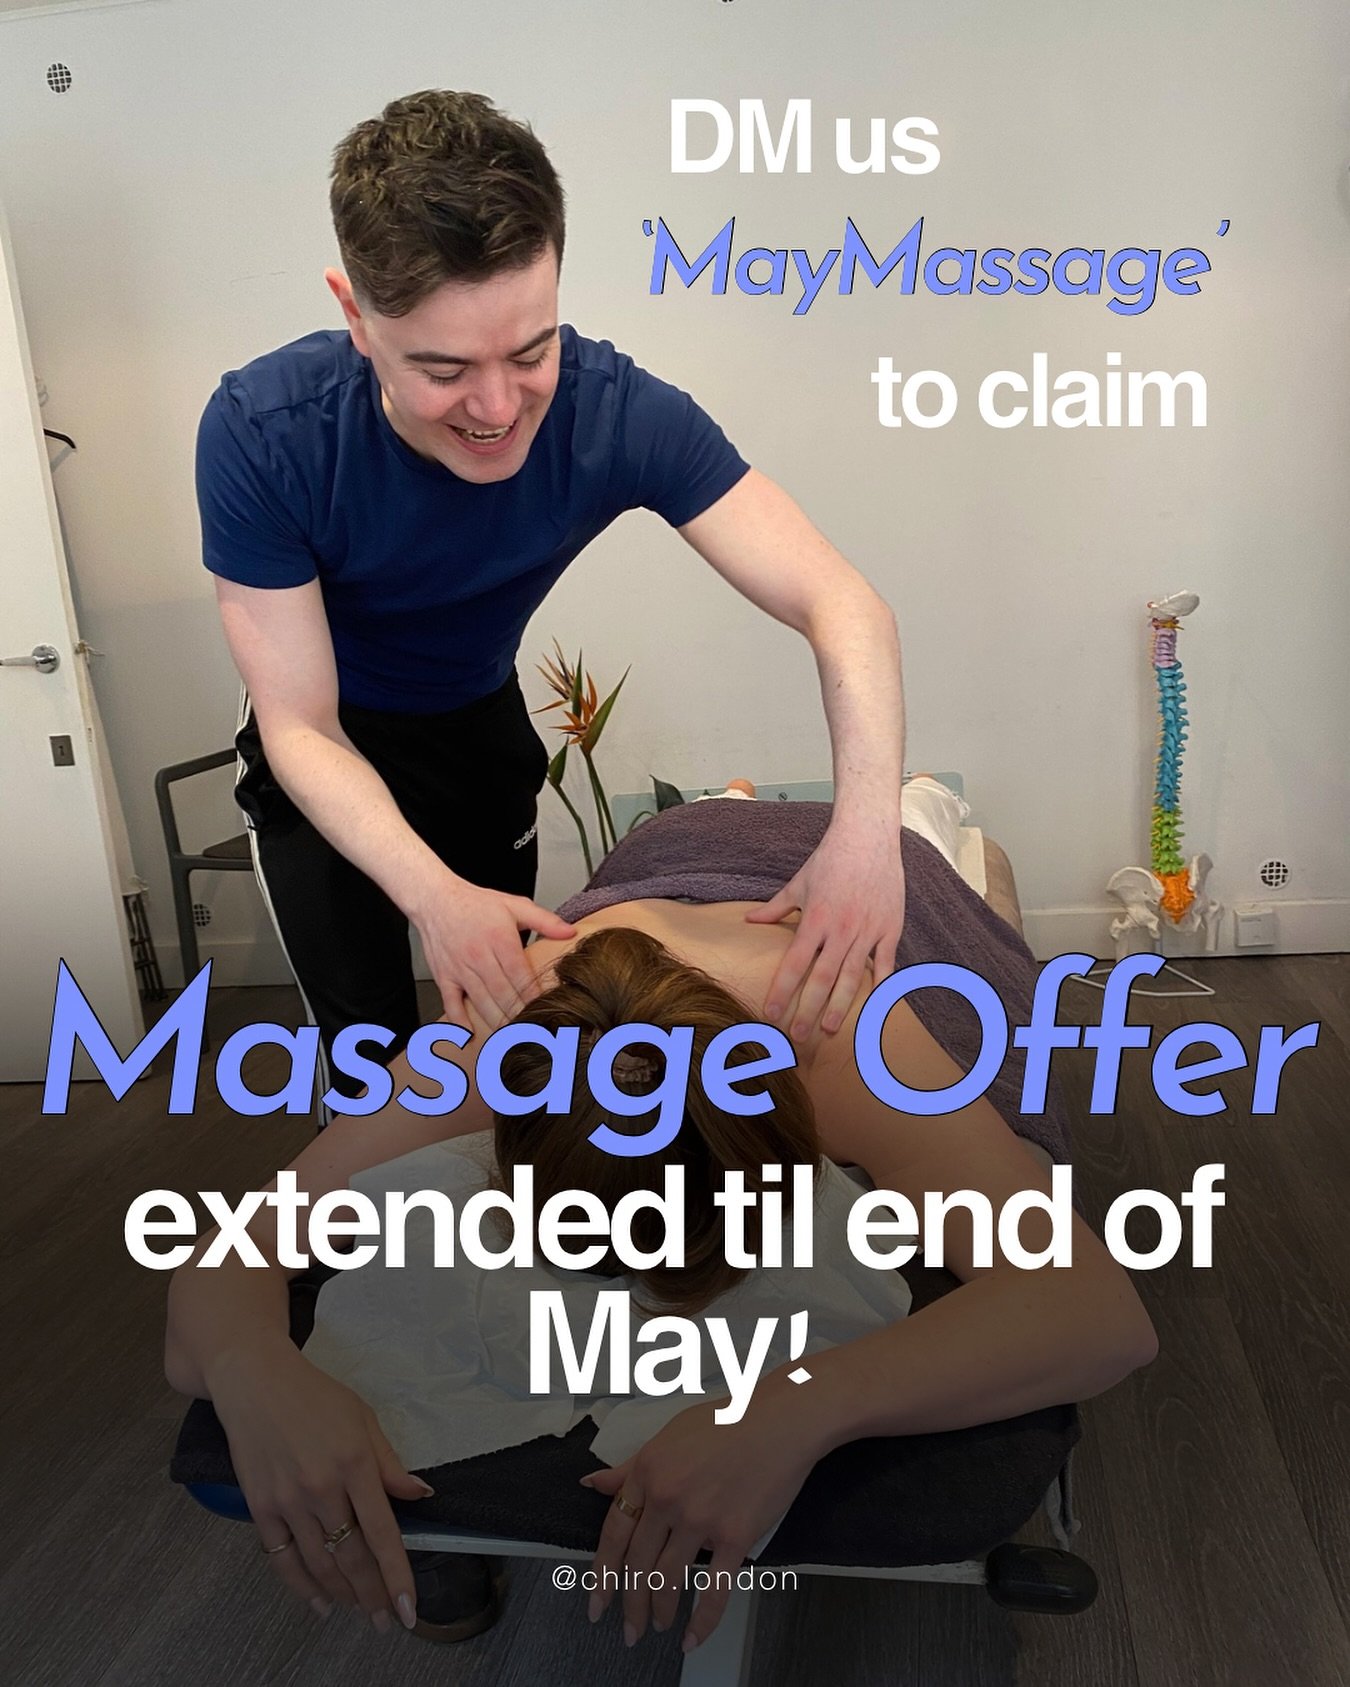 Spring is in the air and we&rsquo;re feeling generous. 

Which is why we&rsquo;ve extended our massage offer by another month! 

Simply DM us &ldquo;MayMassage&rdquo; to hear our exciting offer. 💆🏻&zwj;♂️

Oh and while we&rsquo;re at it, there&rsqu